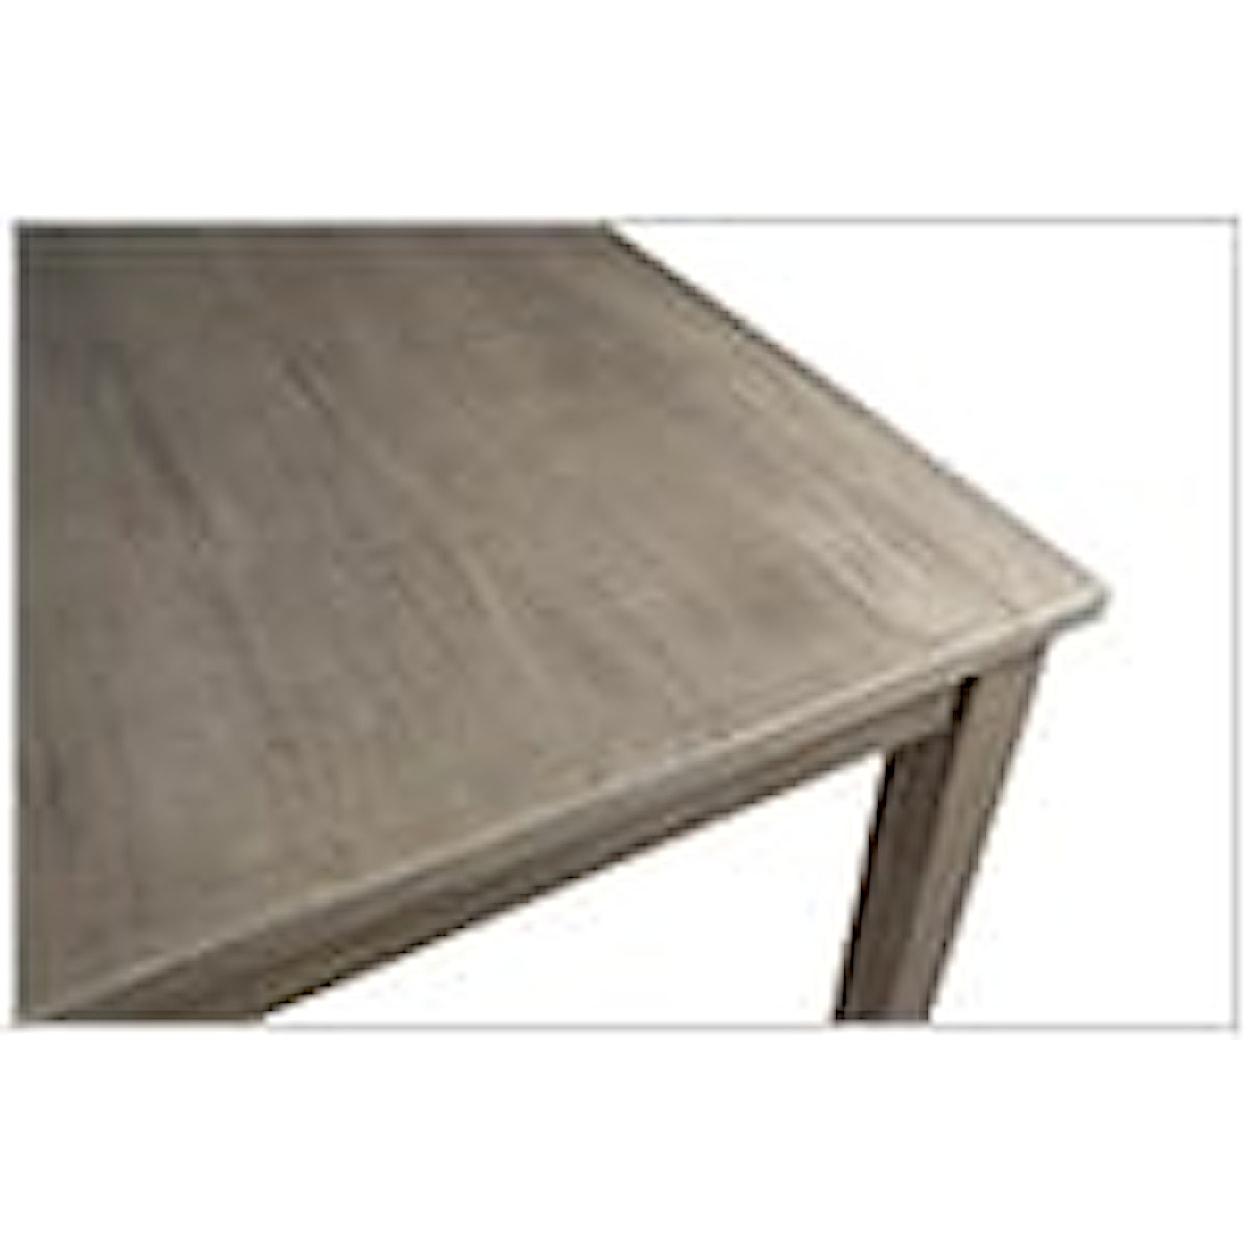 Dovetail Furniture Dining Tables Zion Dining Table 